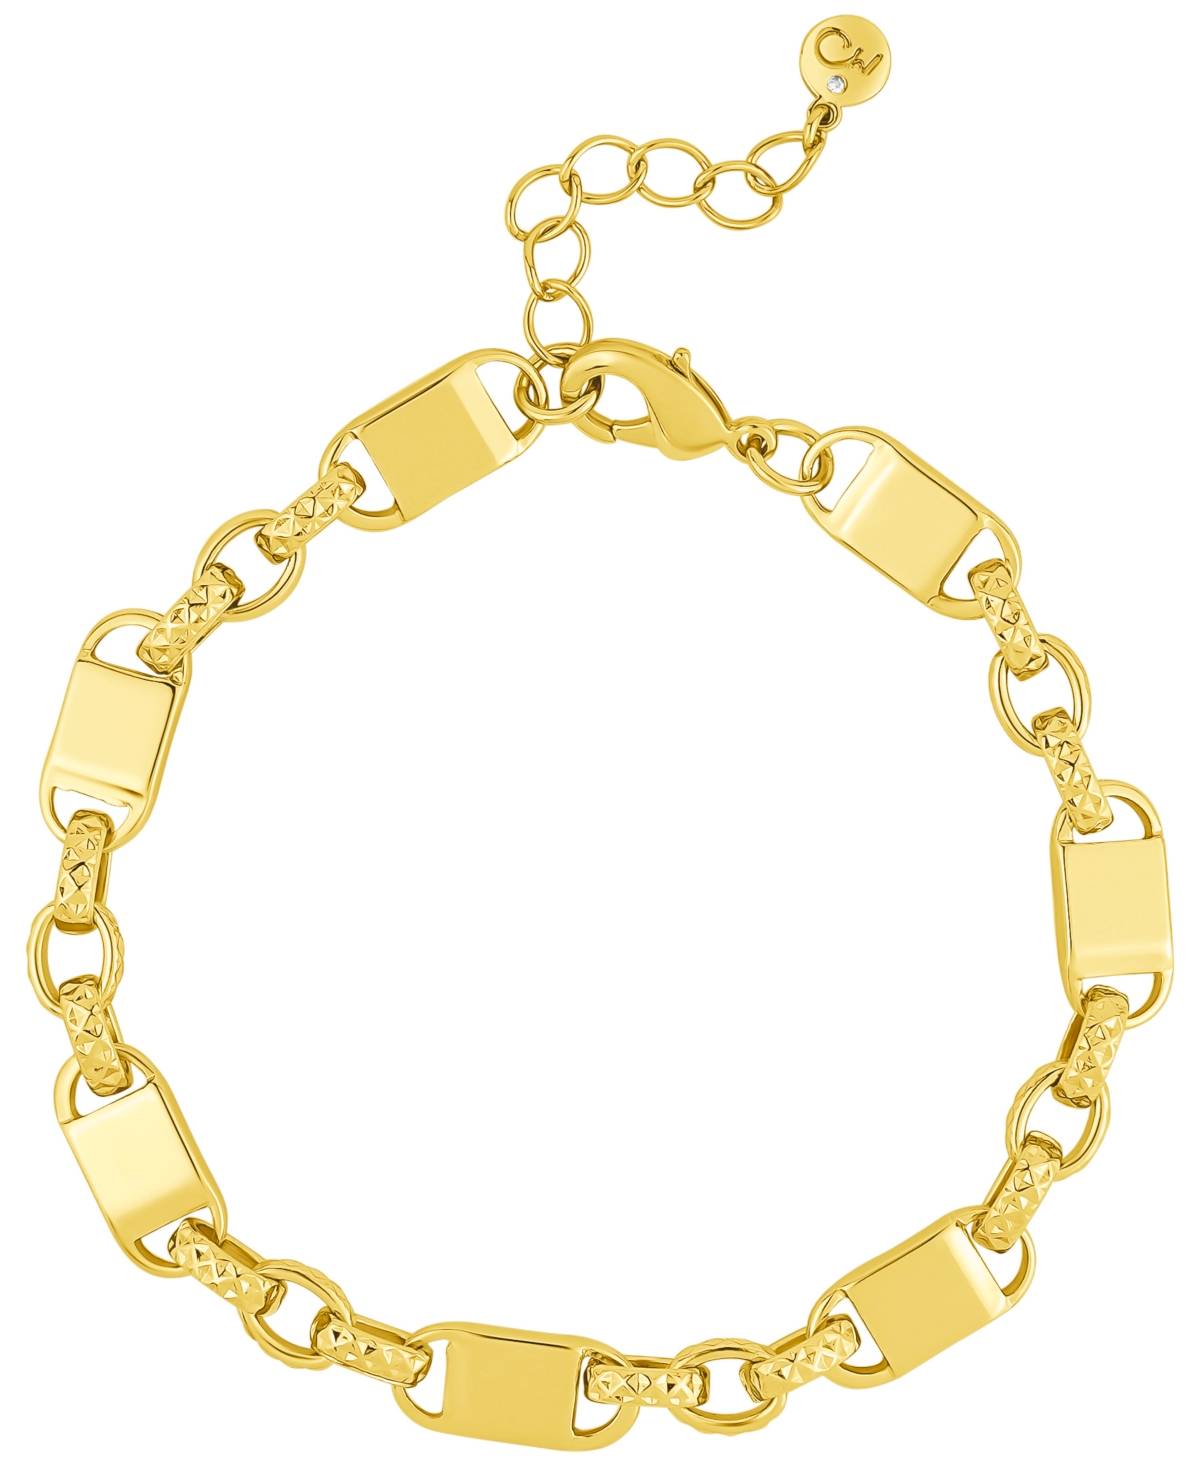 High Polished Square Link and Textured Link Chain Bracelet in 18K Gold Plated Brass - K Gold Plated